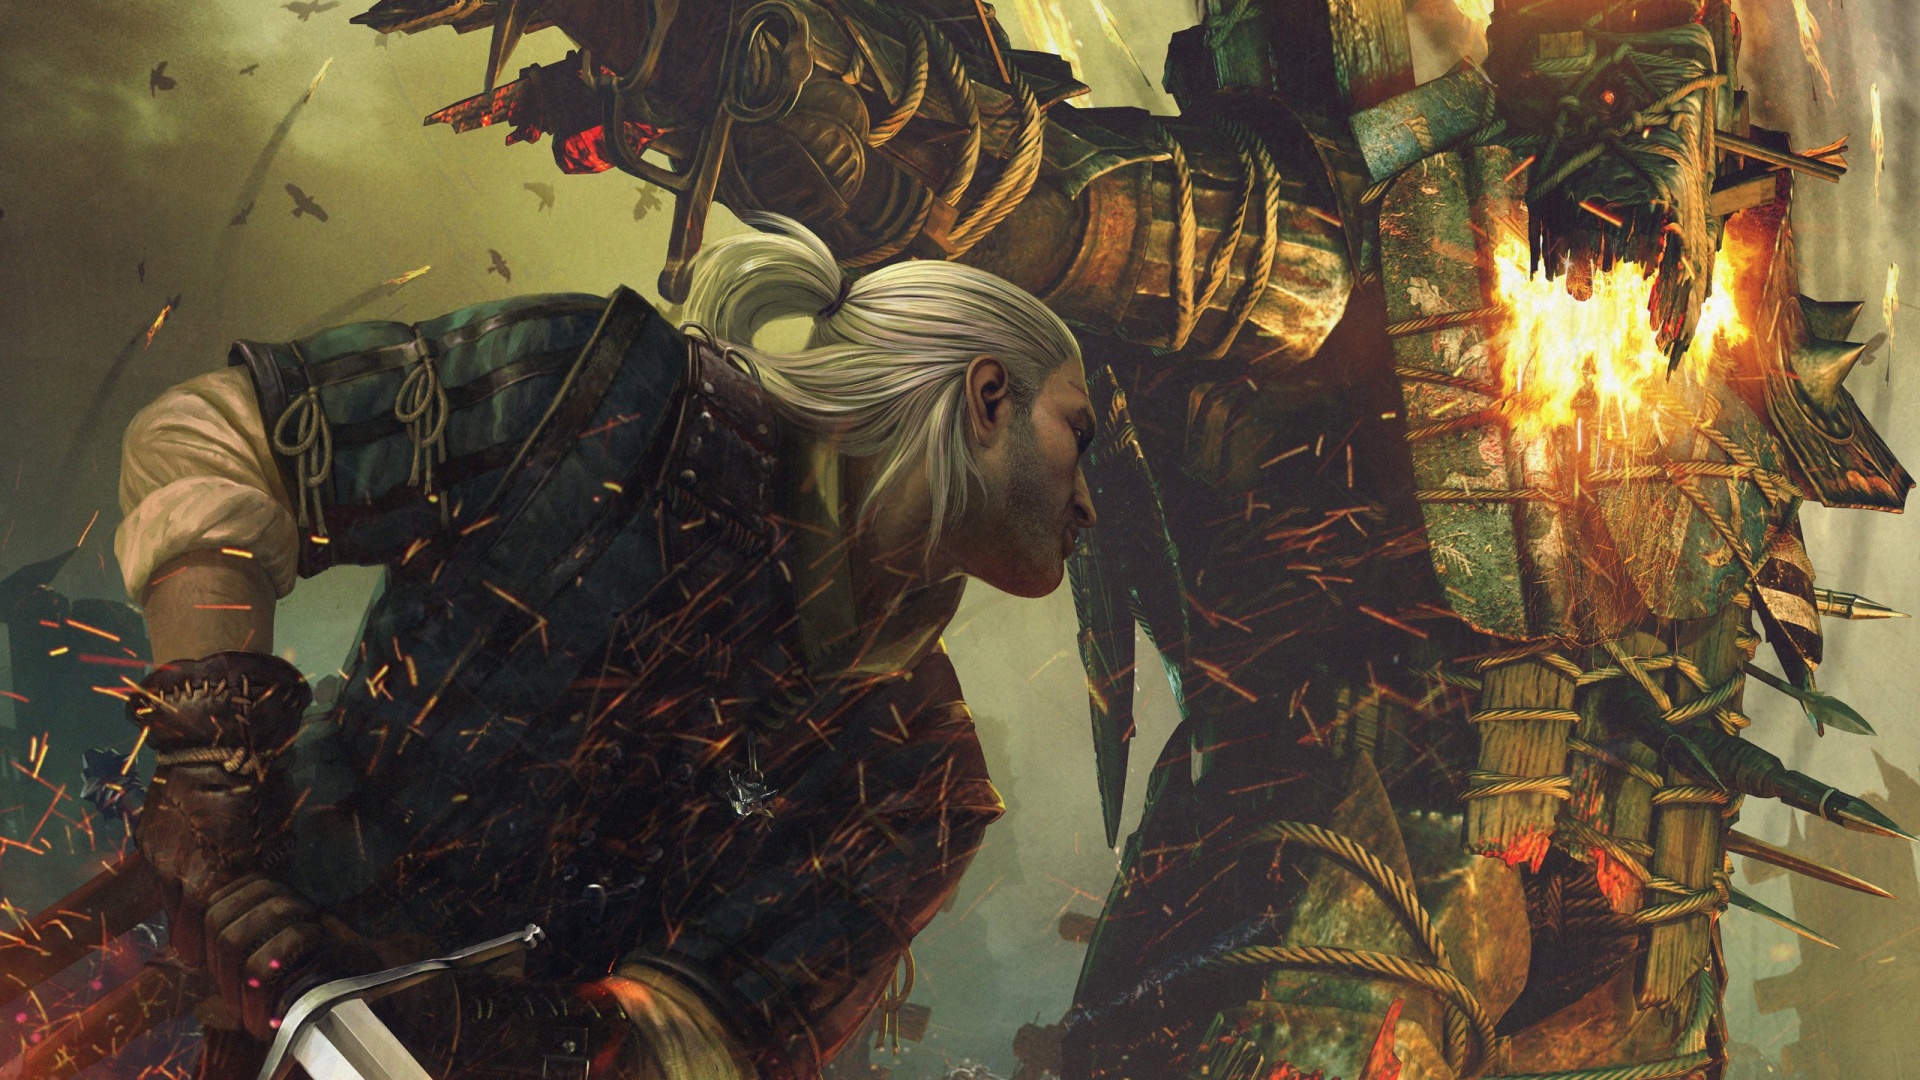 The Witcher 2 Wallpapers